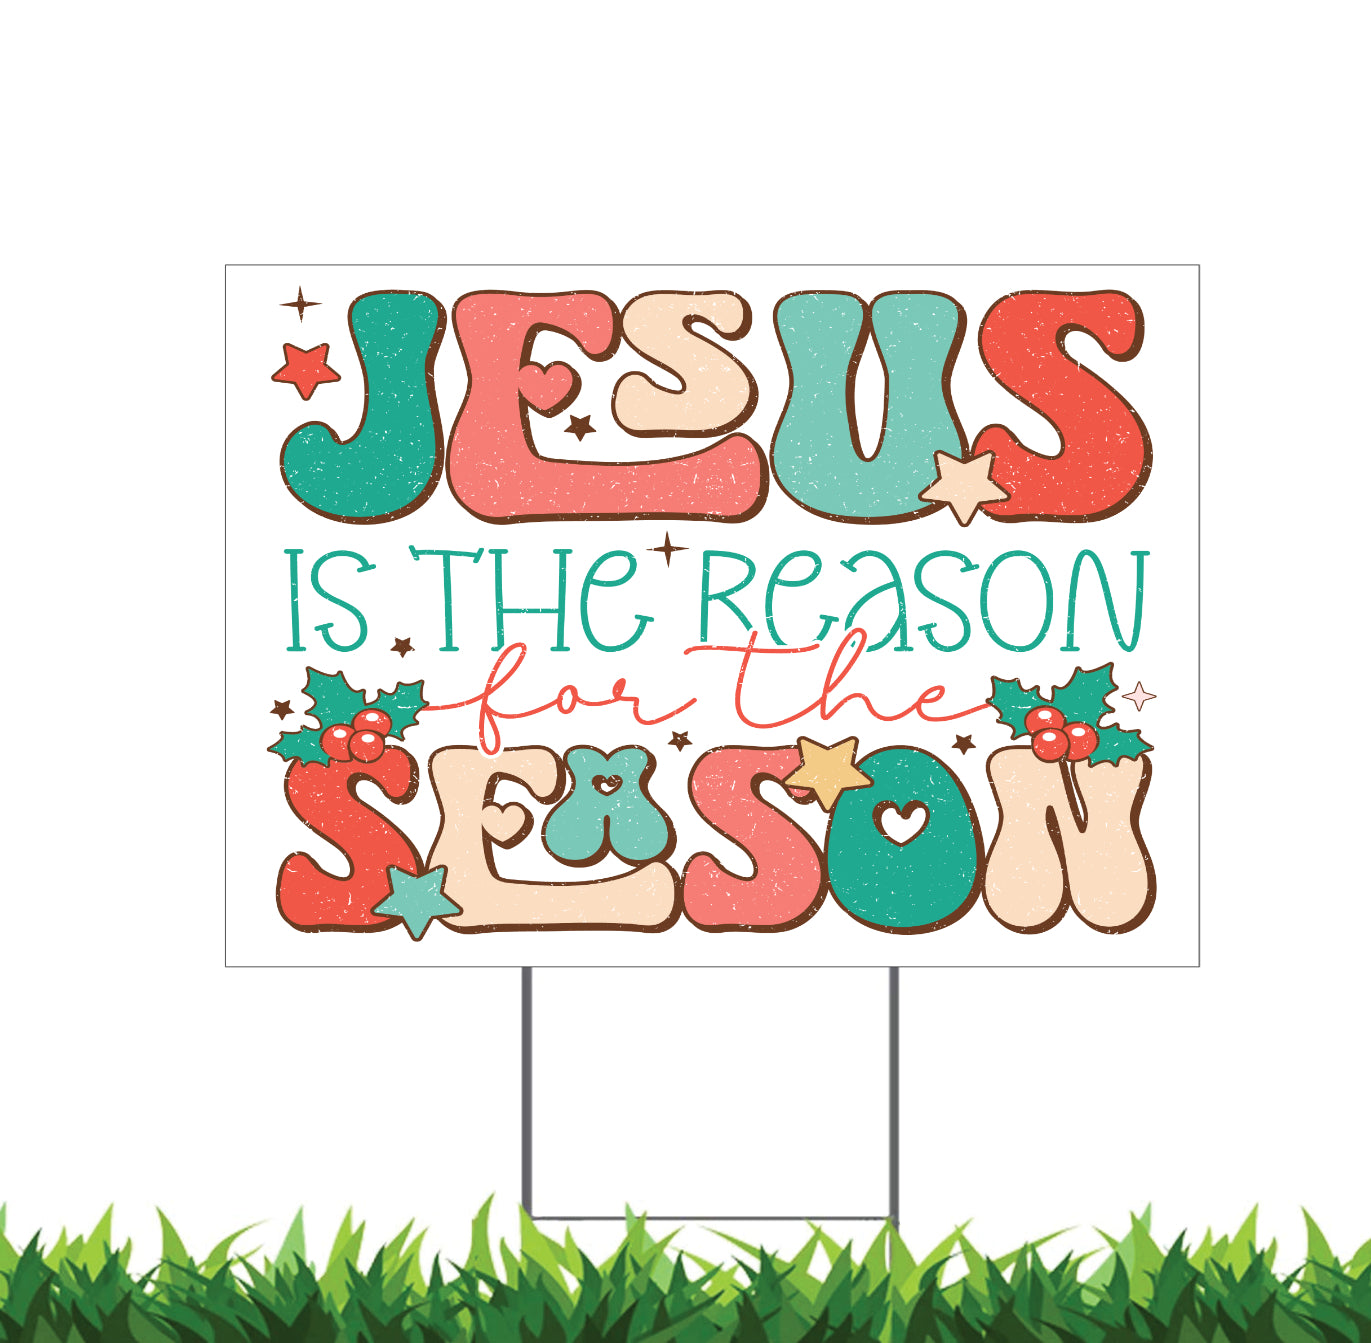 Jesus Is The Reason For The Season Yard Sign, 18x12, 24x18, or 36x24 inch, Double Sided, H-Stake Included, v5